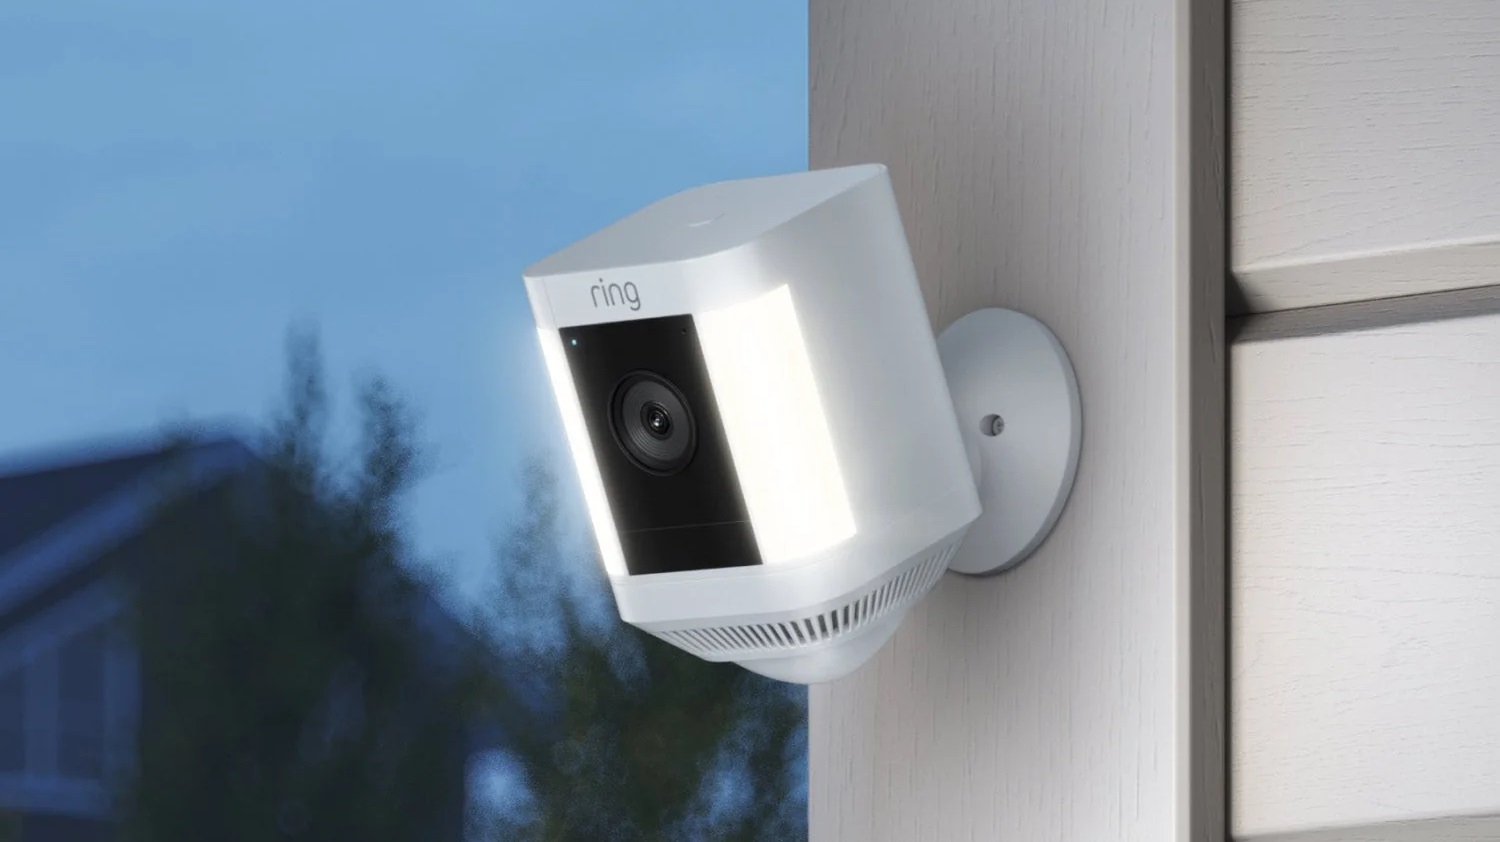 How To Connect Ring Security Camera To Wi-Fi